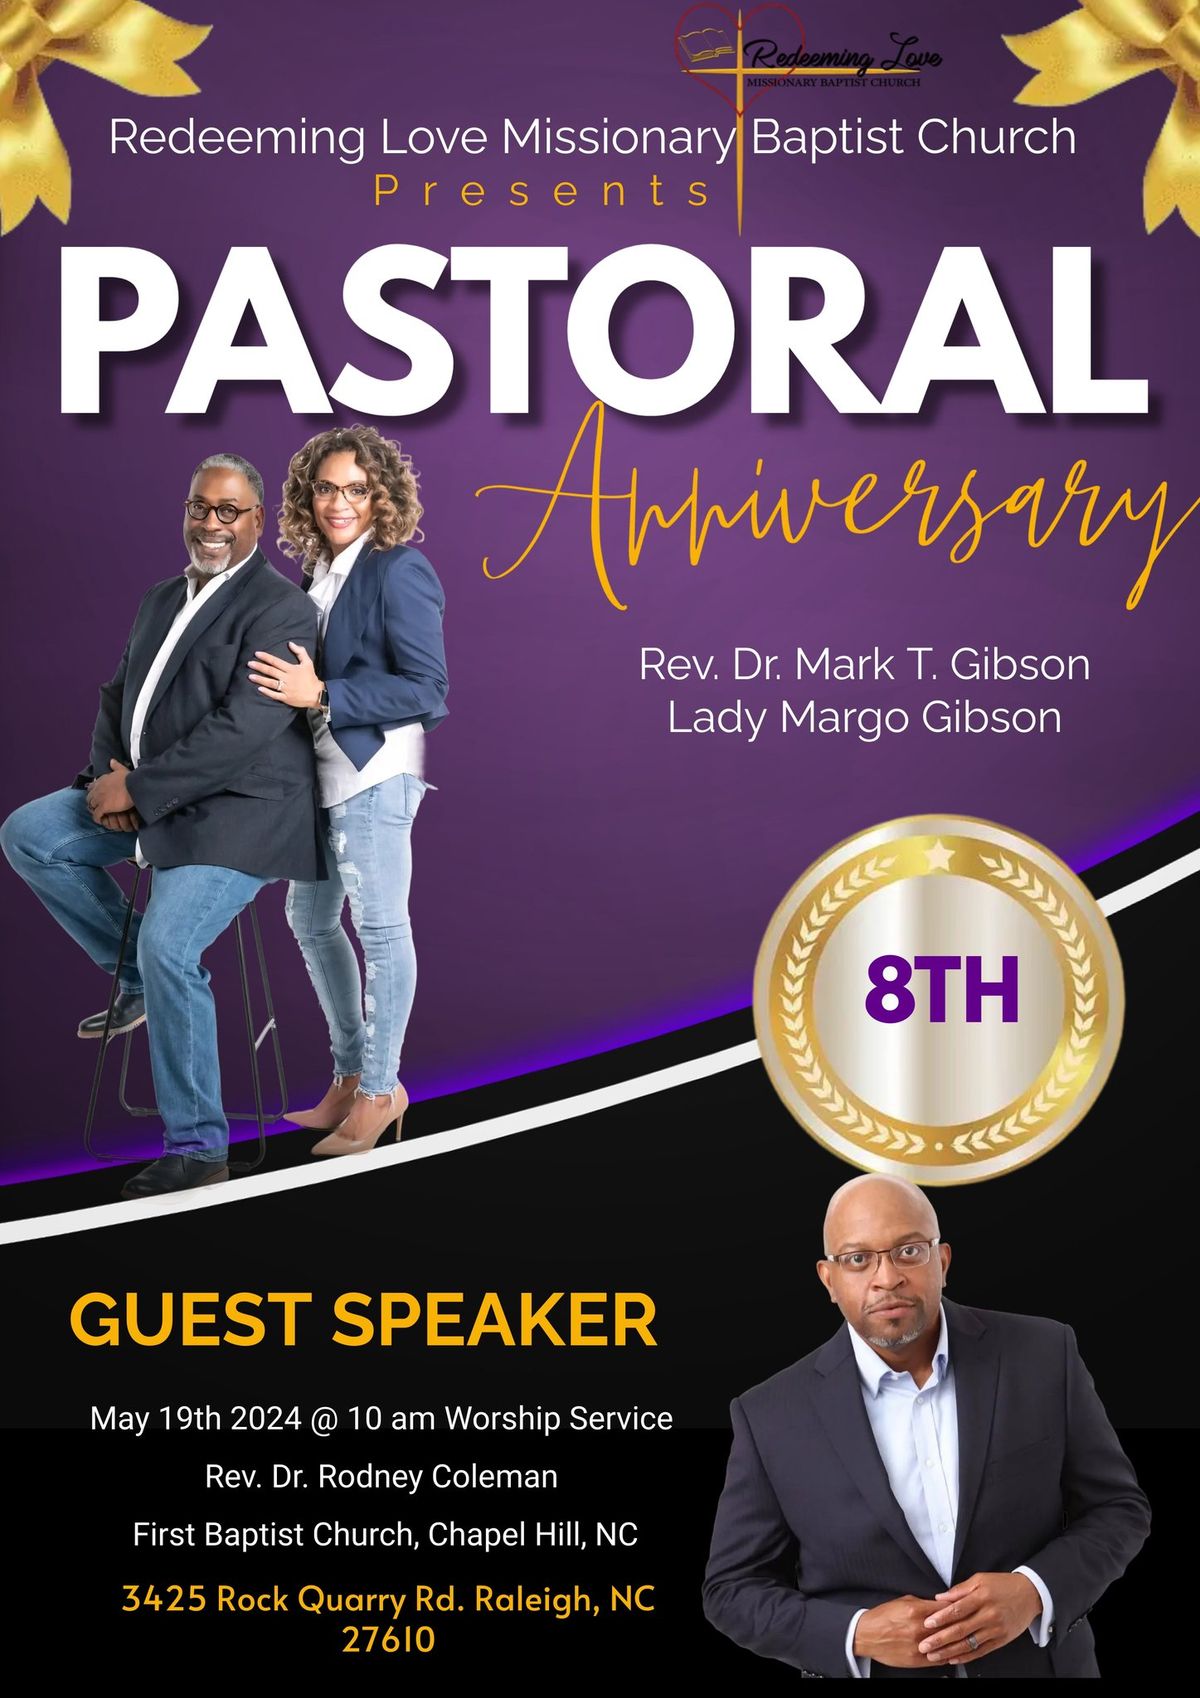 8th Pastoral Anniversary for Mark T. Gibson